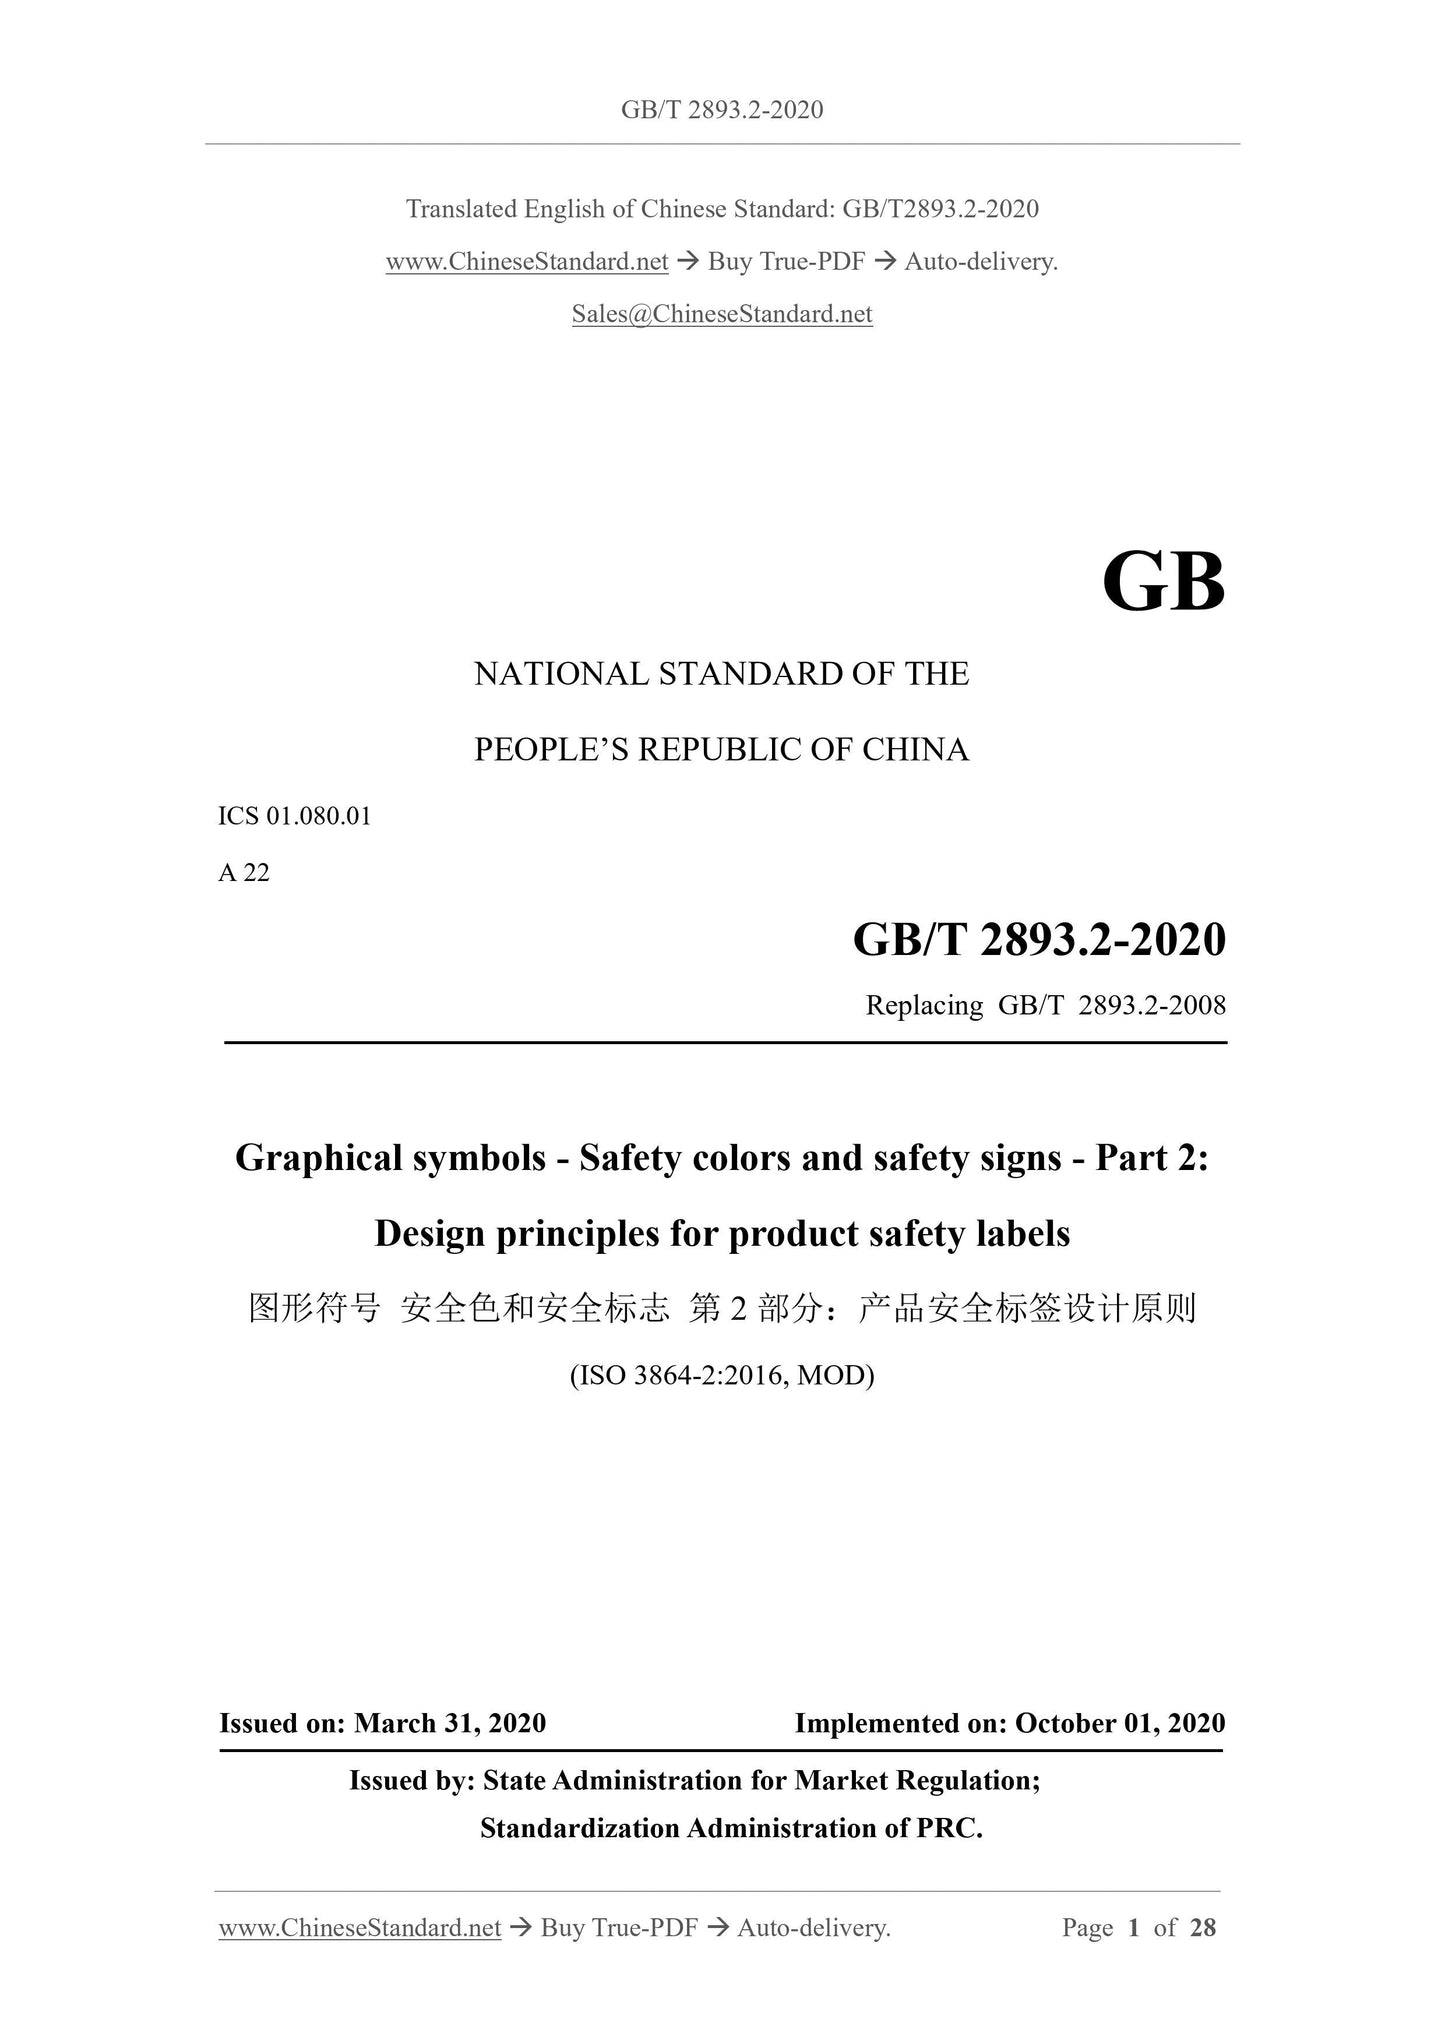 GB/T 2893.2-2020 Page 1